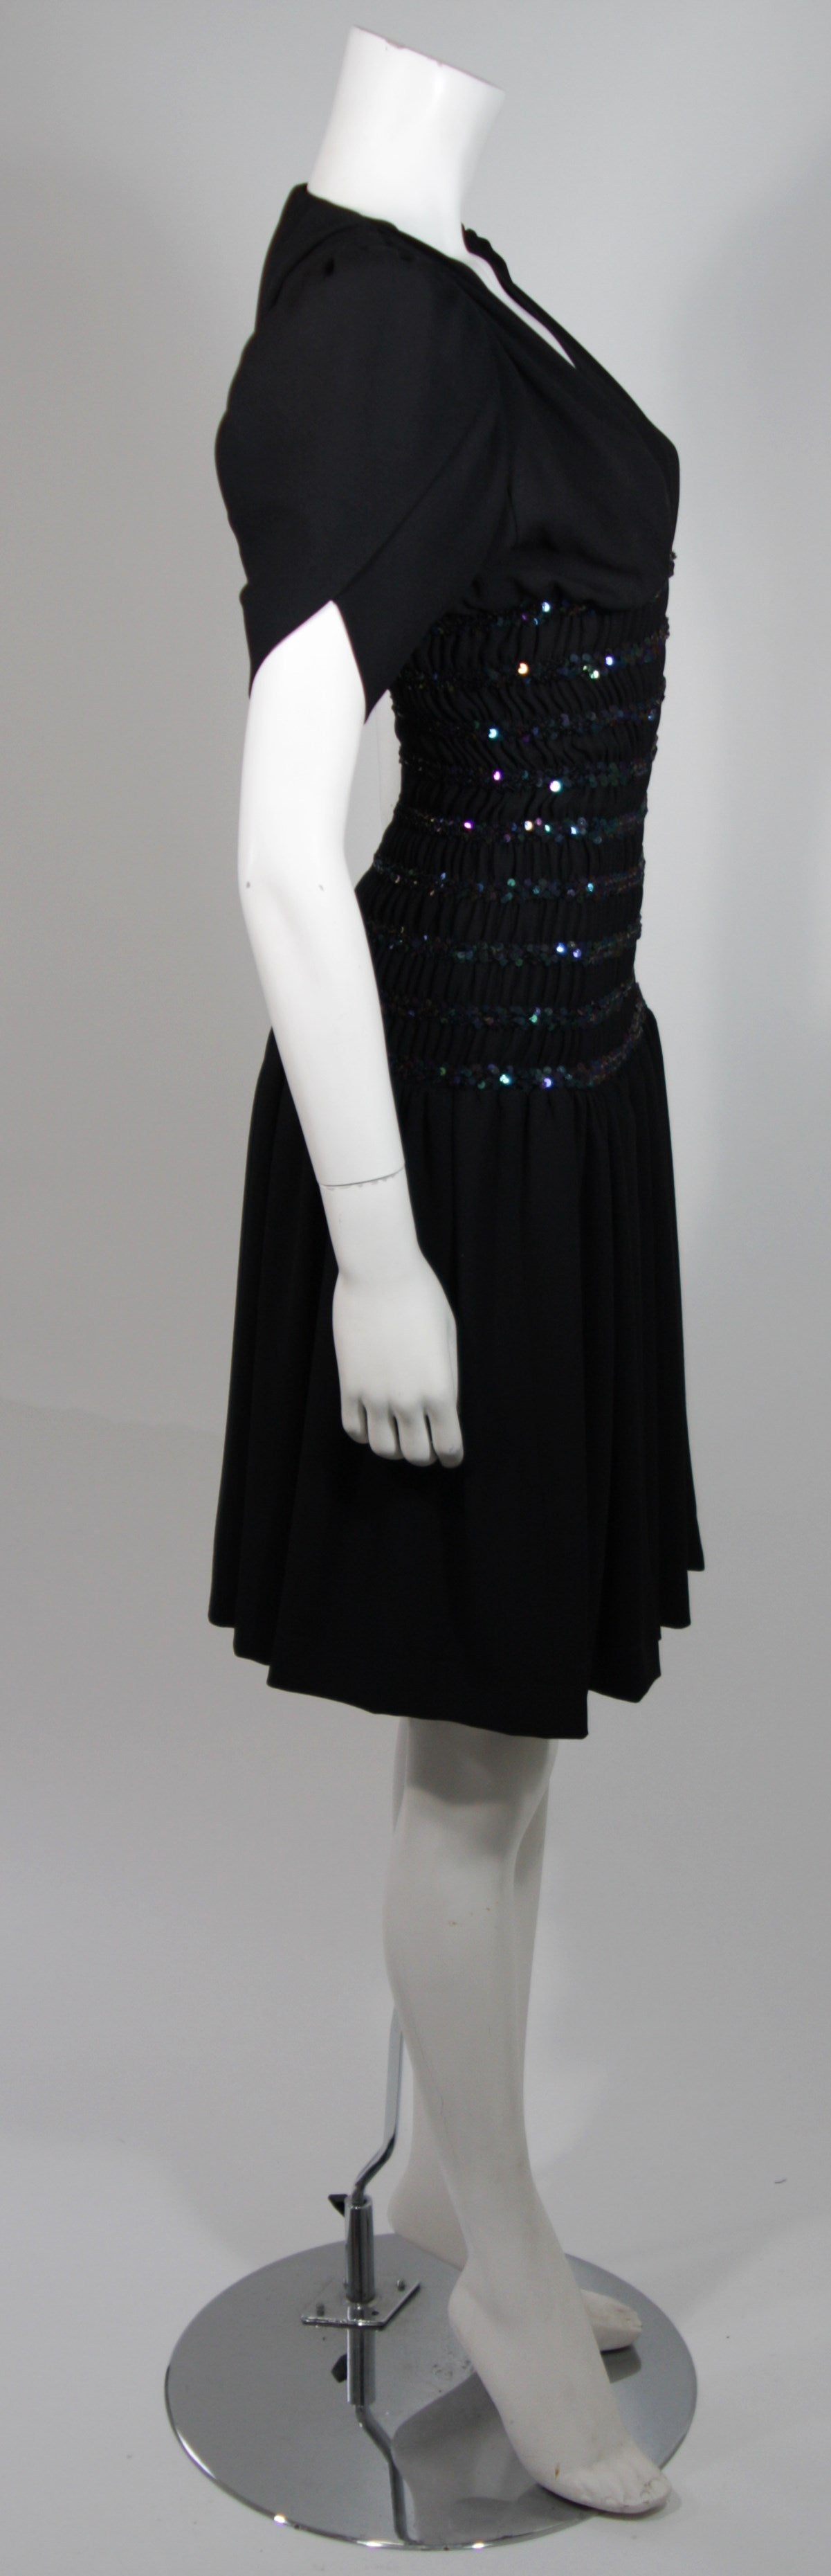 Yves Saint Laurent Black Cocktail Gown with Sequin Smocked Waist Size 38 For Sale 1